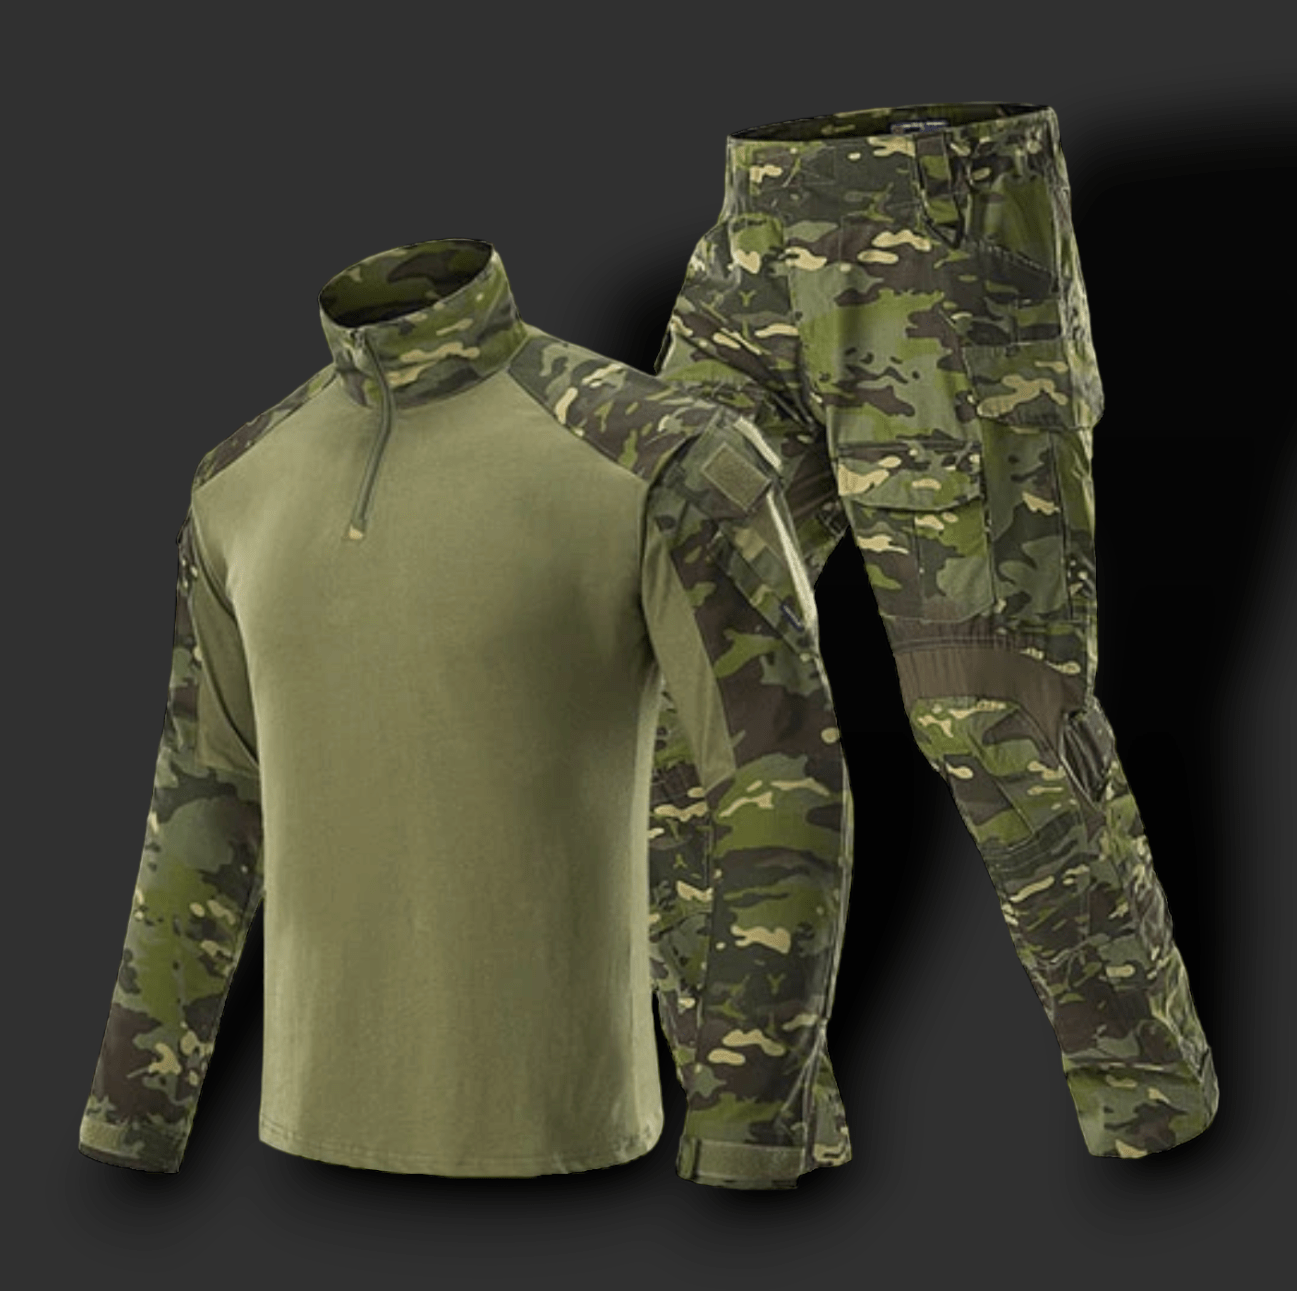 Tactical Uniforms Men Rip-stop Camouflage Military Clothing Sets G3 Army Suit Airsoft Paintball Multicam Cargo Pant Combat Shirt - BlasterMasters